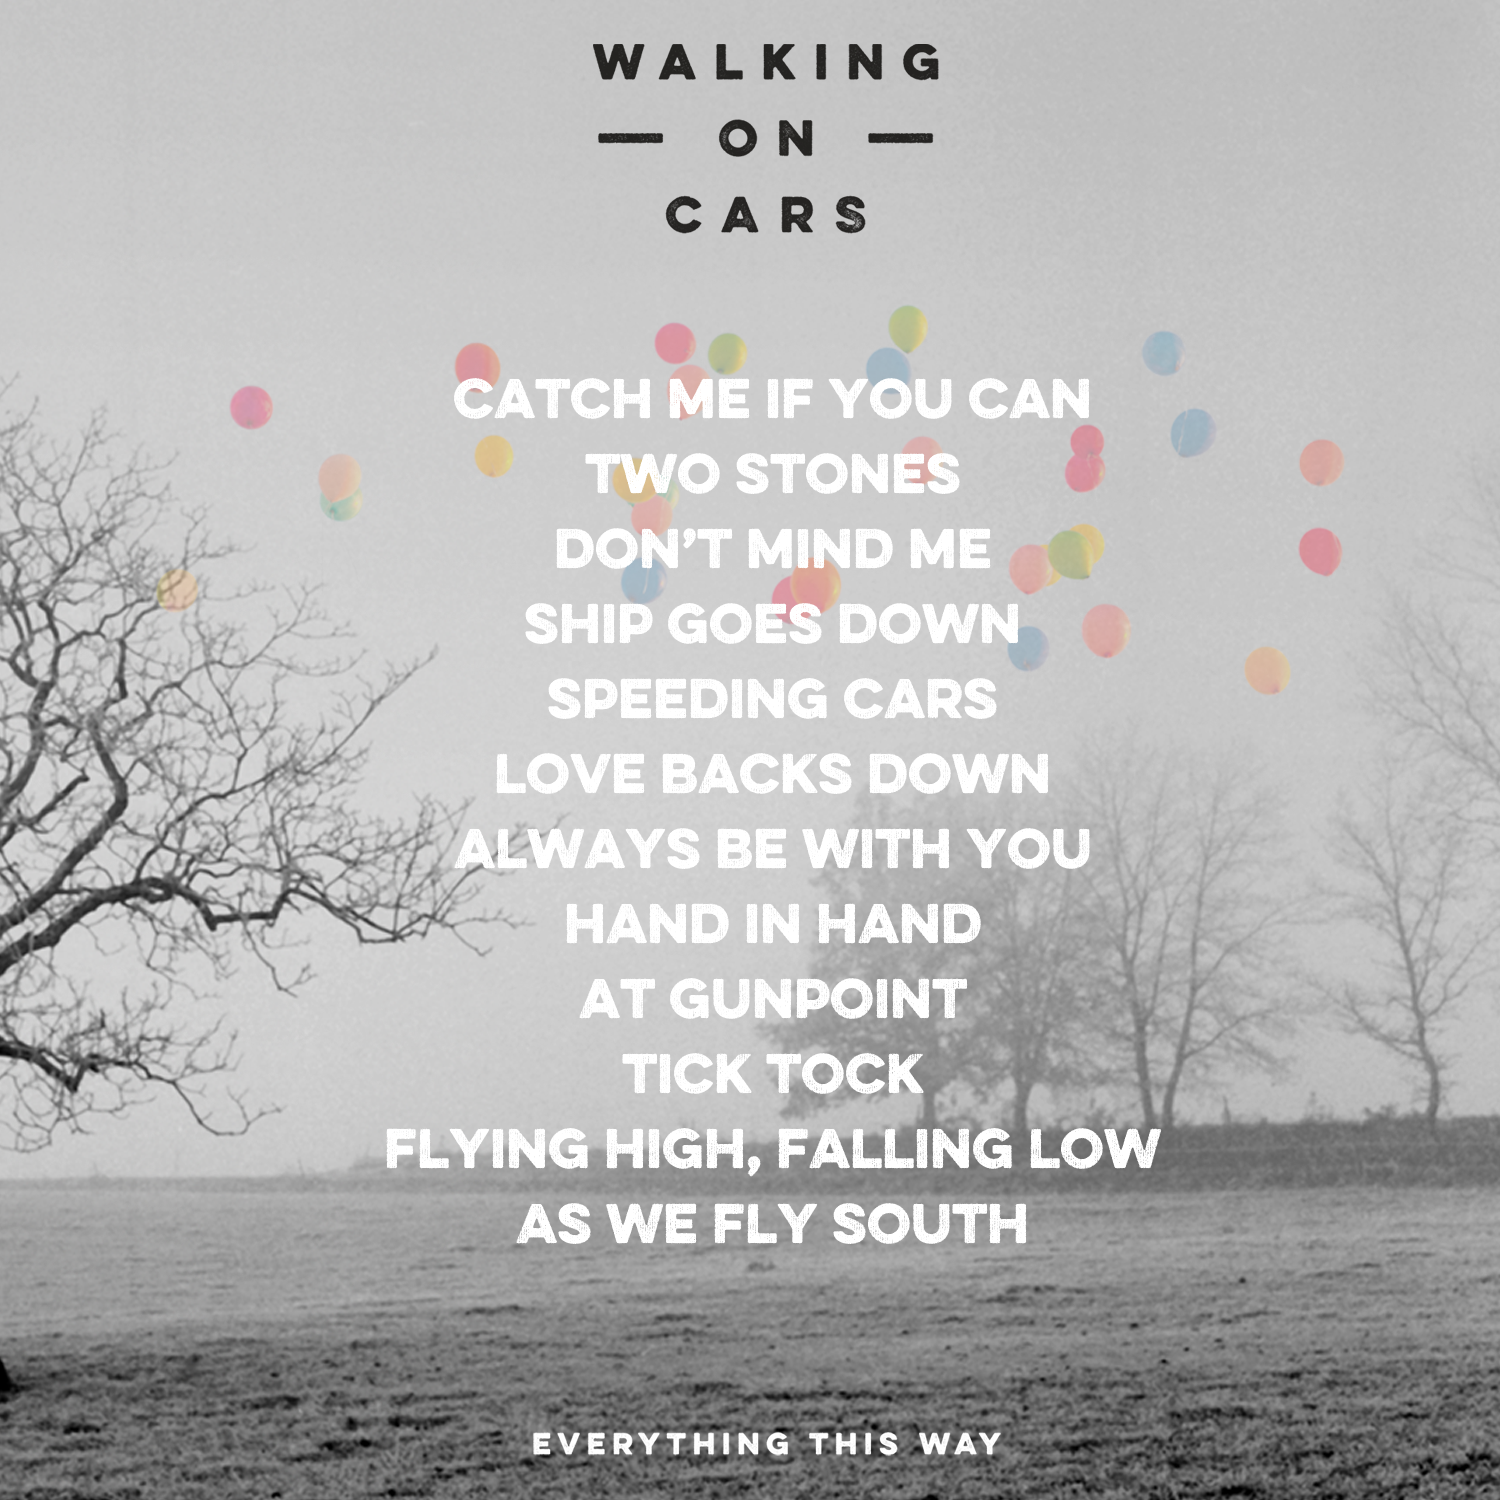 two stones walking on cars